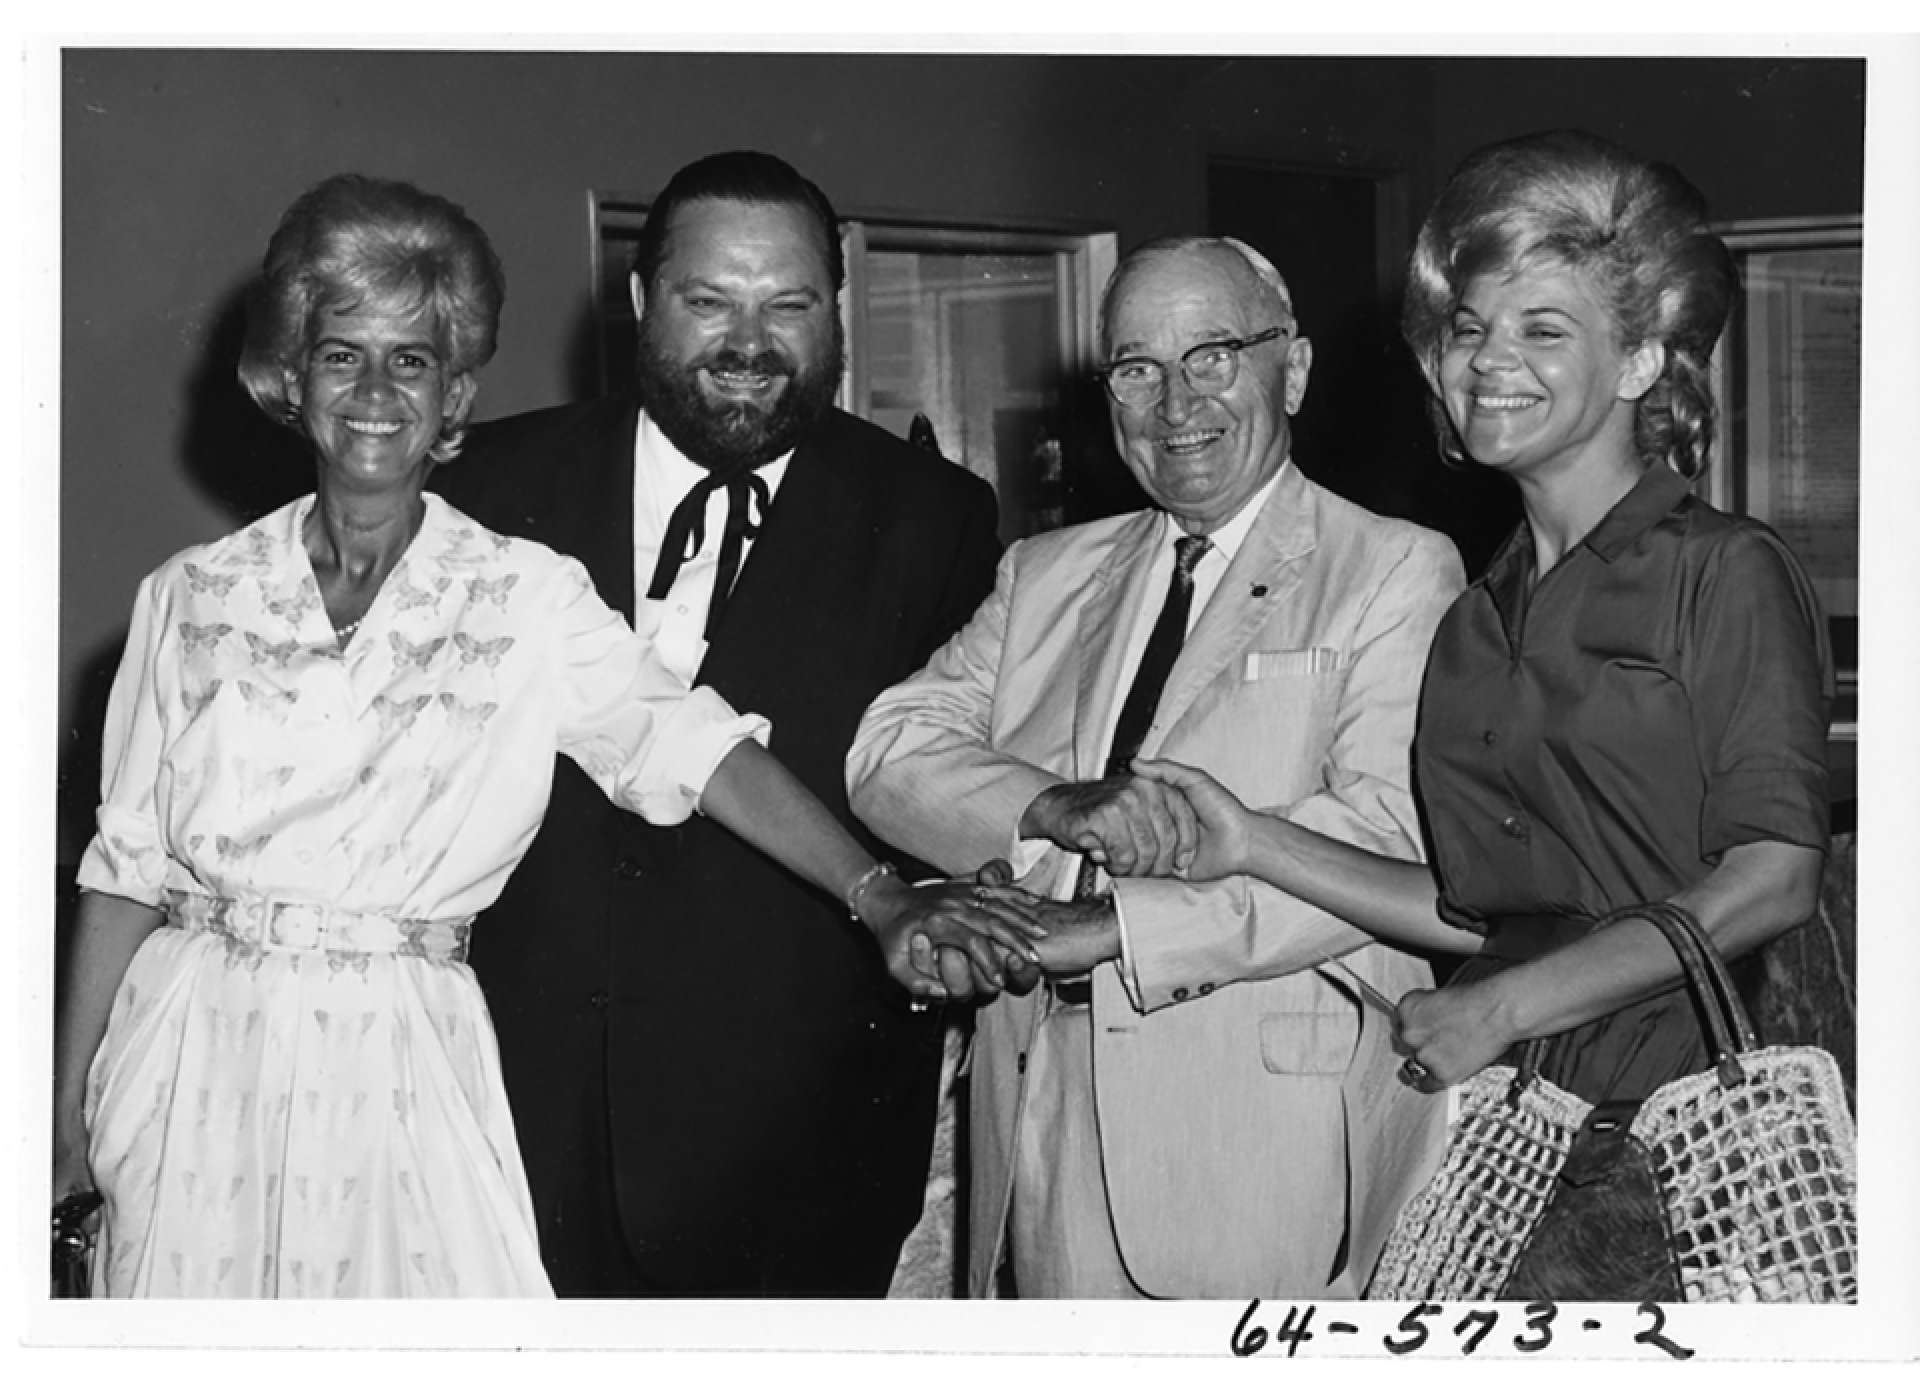 Former President Harry S. Truman and Al Hirt and family in the Harry S. Truman Library. July 19,1963 Courtesy: Harry S. Truman Library and Museum.